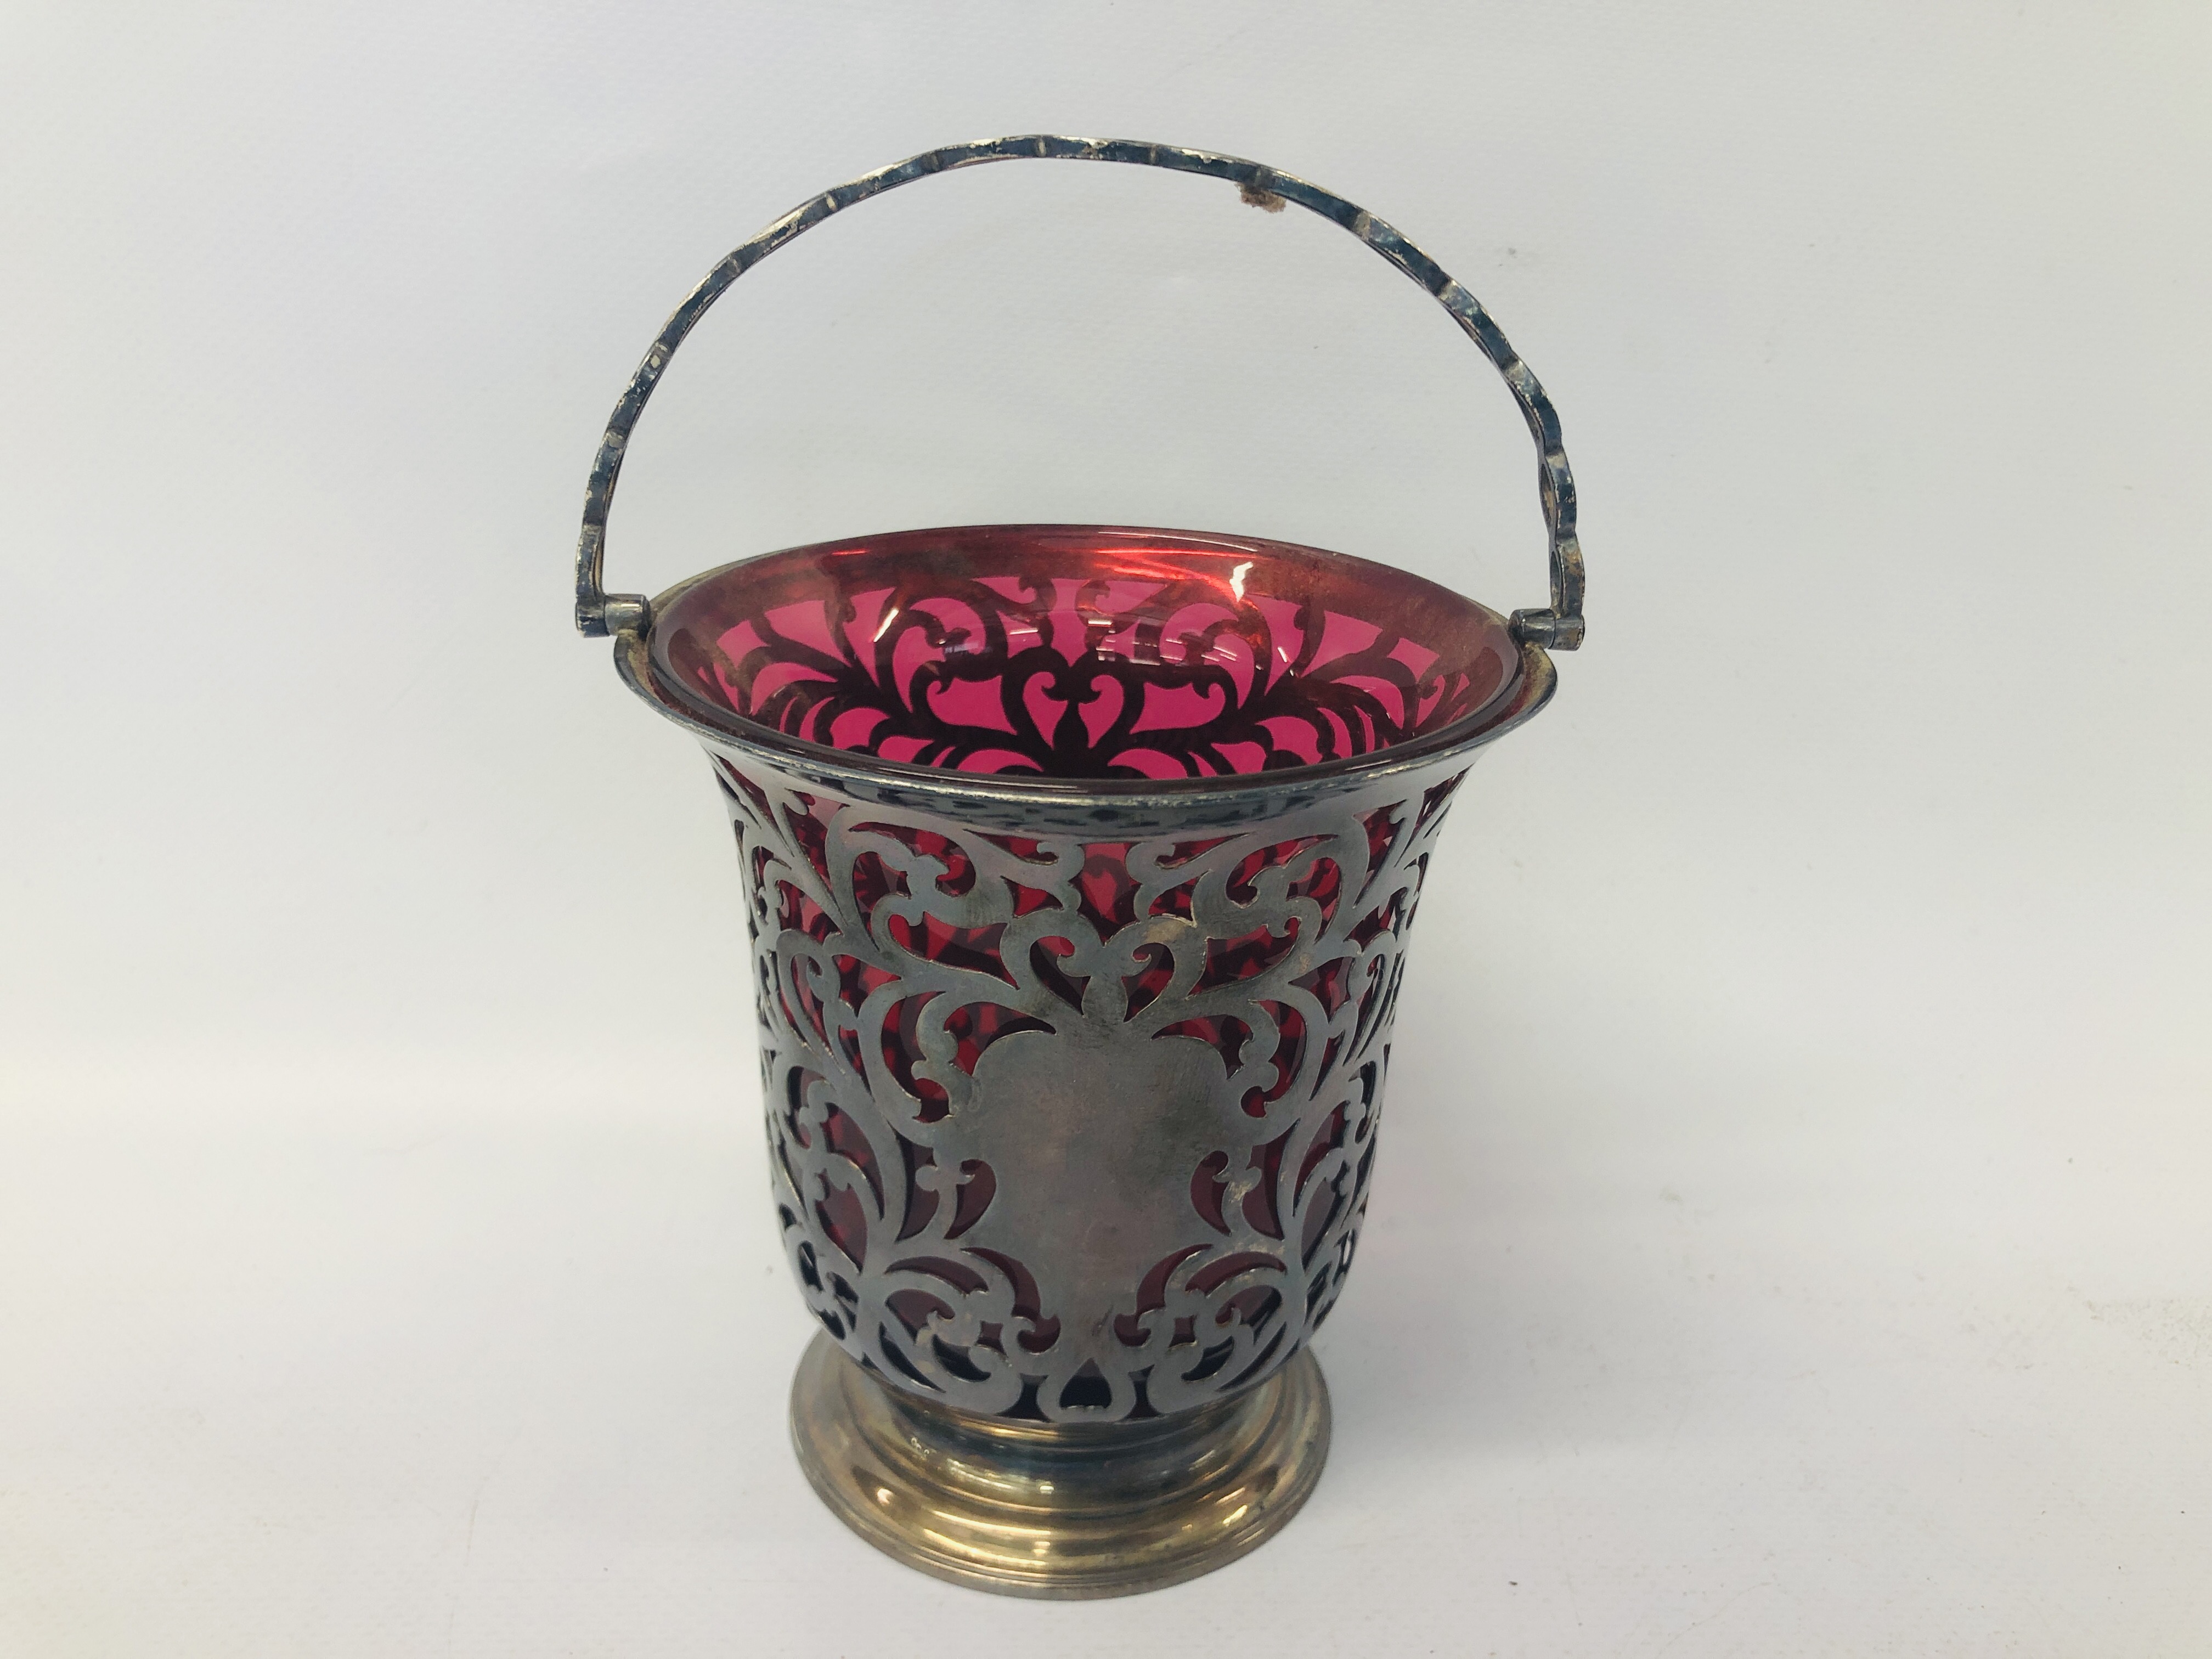 PERIOD SILVER OPEN WORK BASKET WITH CRANBERRY GLASS LINER H 11CM (NOT INCLUDING HANDLE)